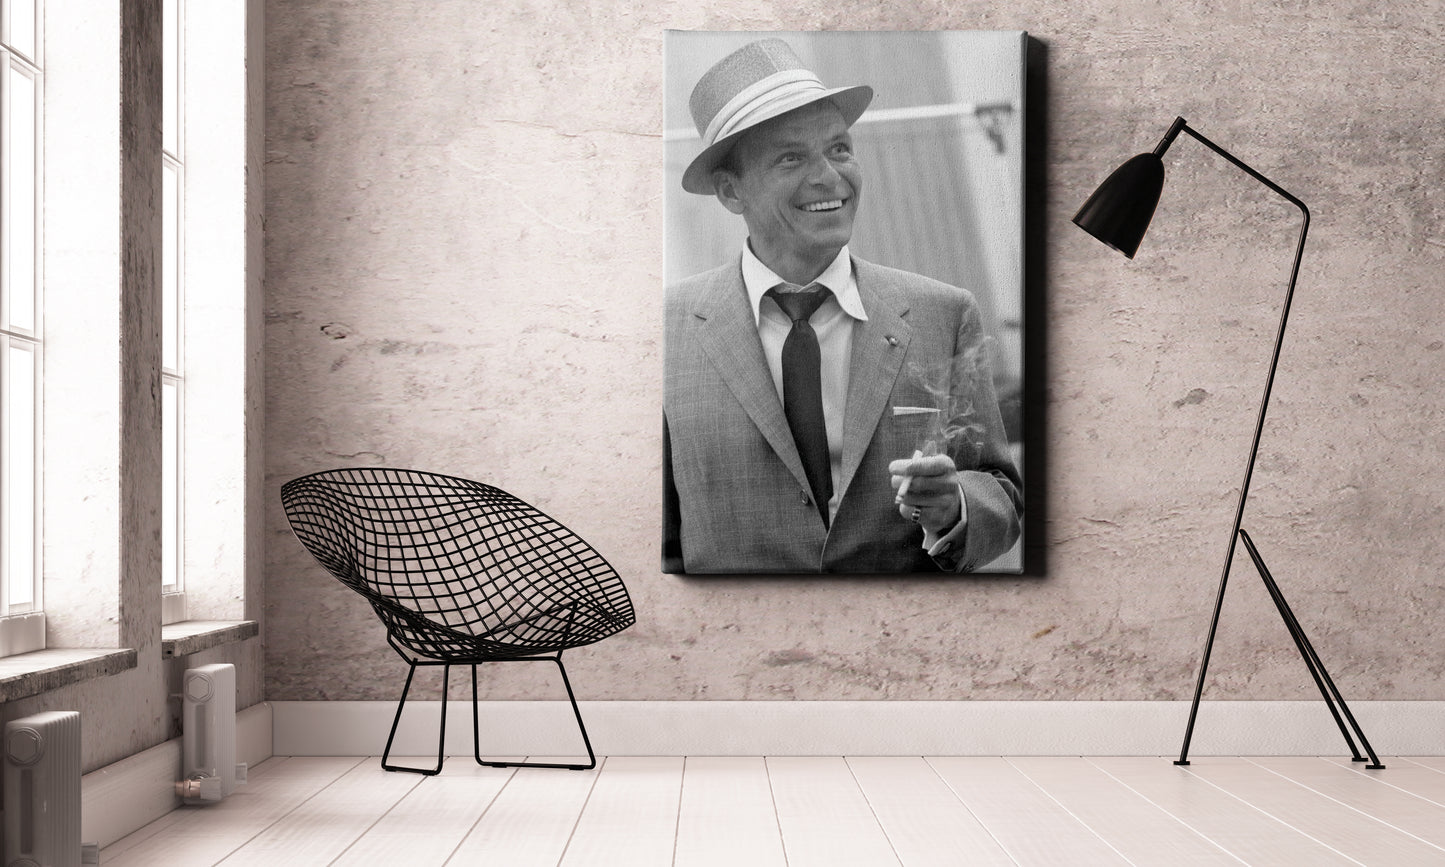 Frank Sinatra Poster Smoking Black and White Canvas Wall Art Home Decor Framed Art Poster for Home